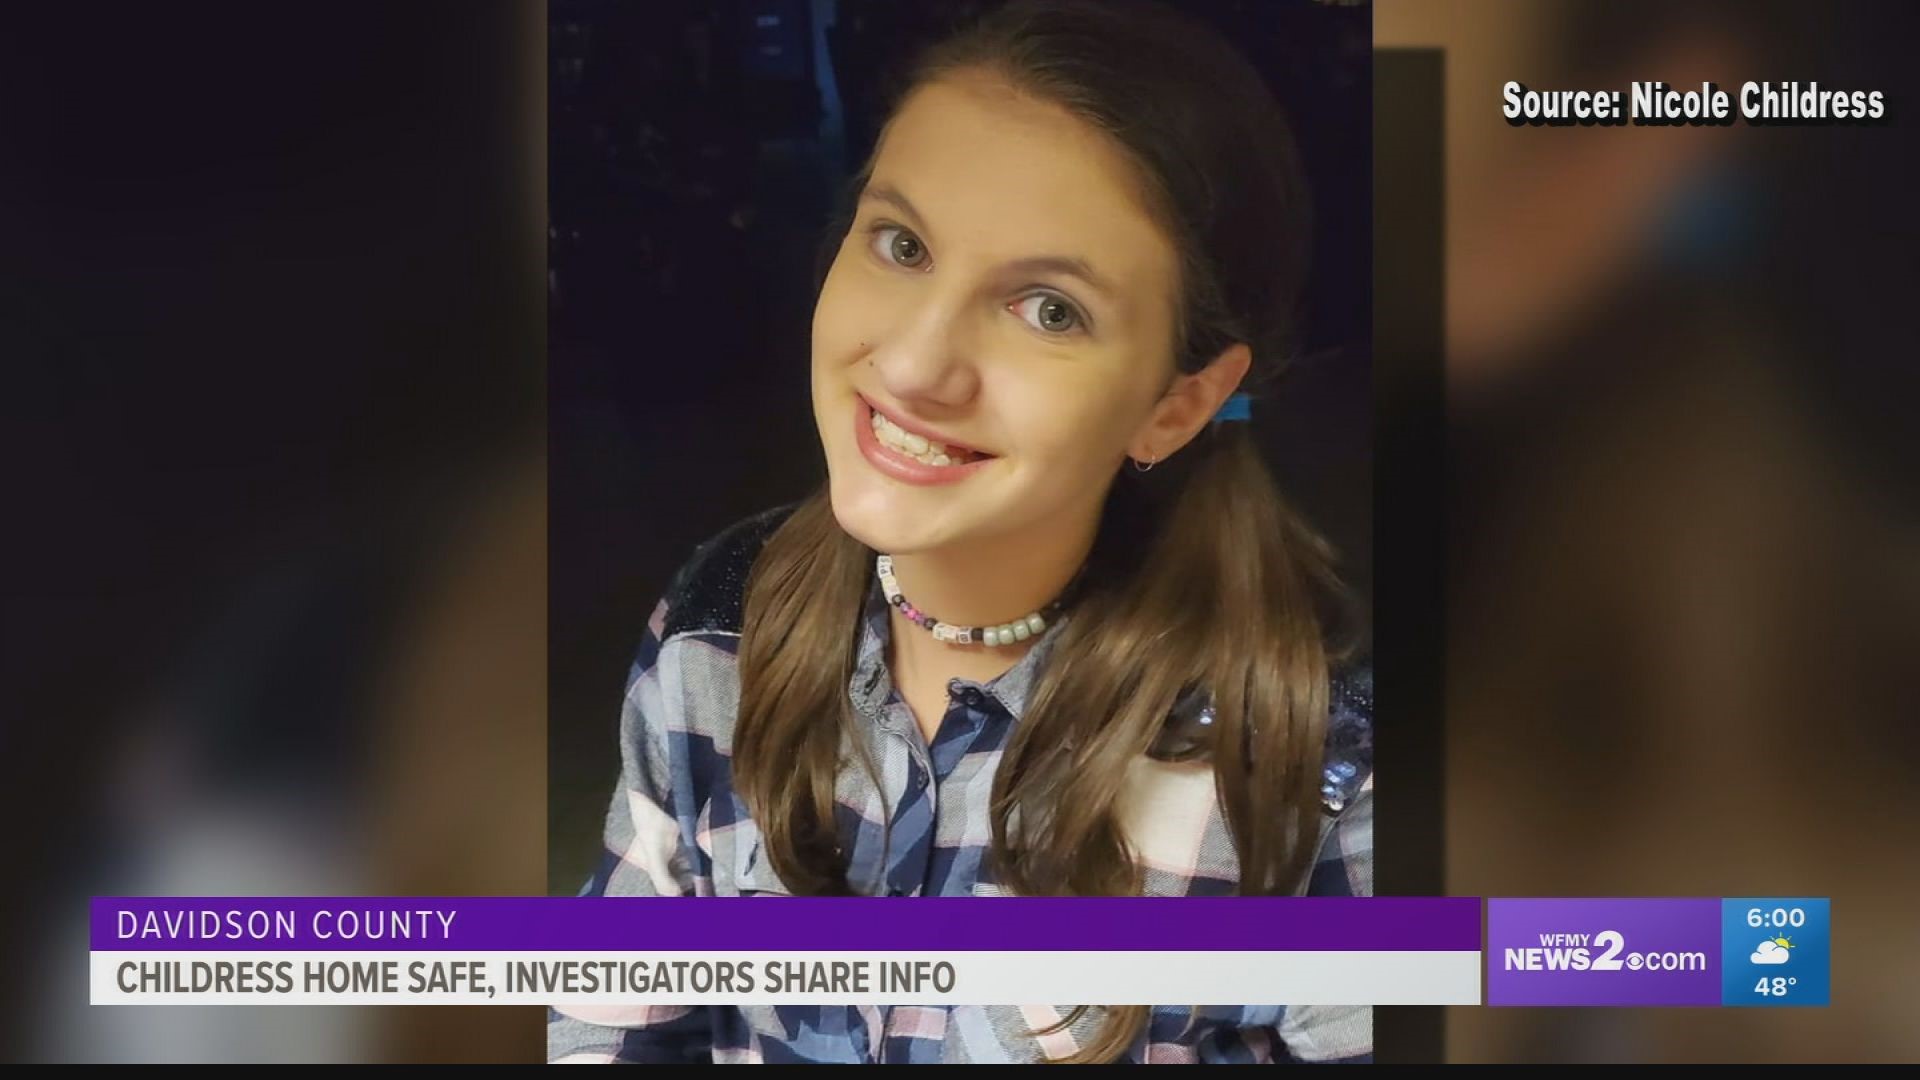 The Davidson County and Alamance County Sheriff's Office worked together in the case. They found it isn't the first time the suspect contacted young girls.